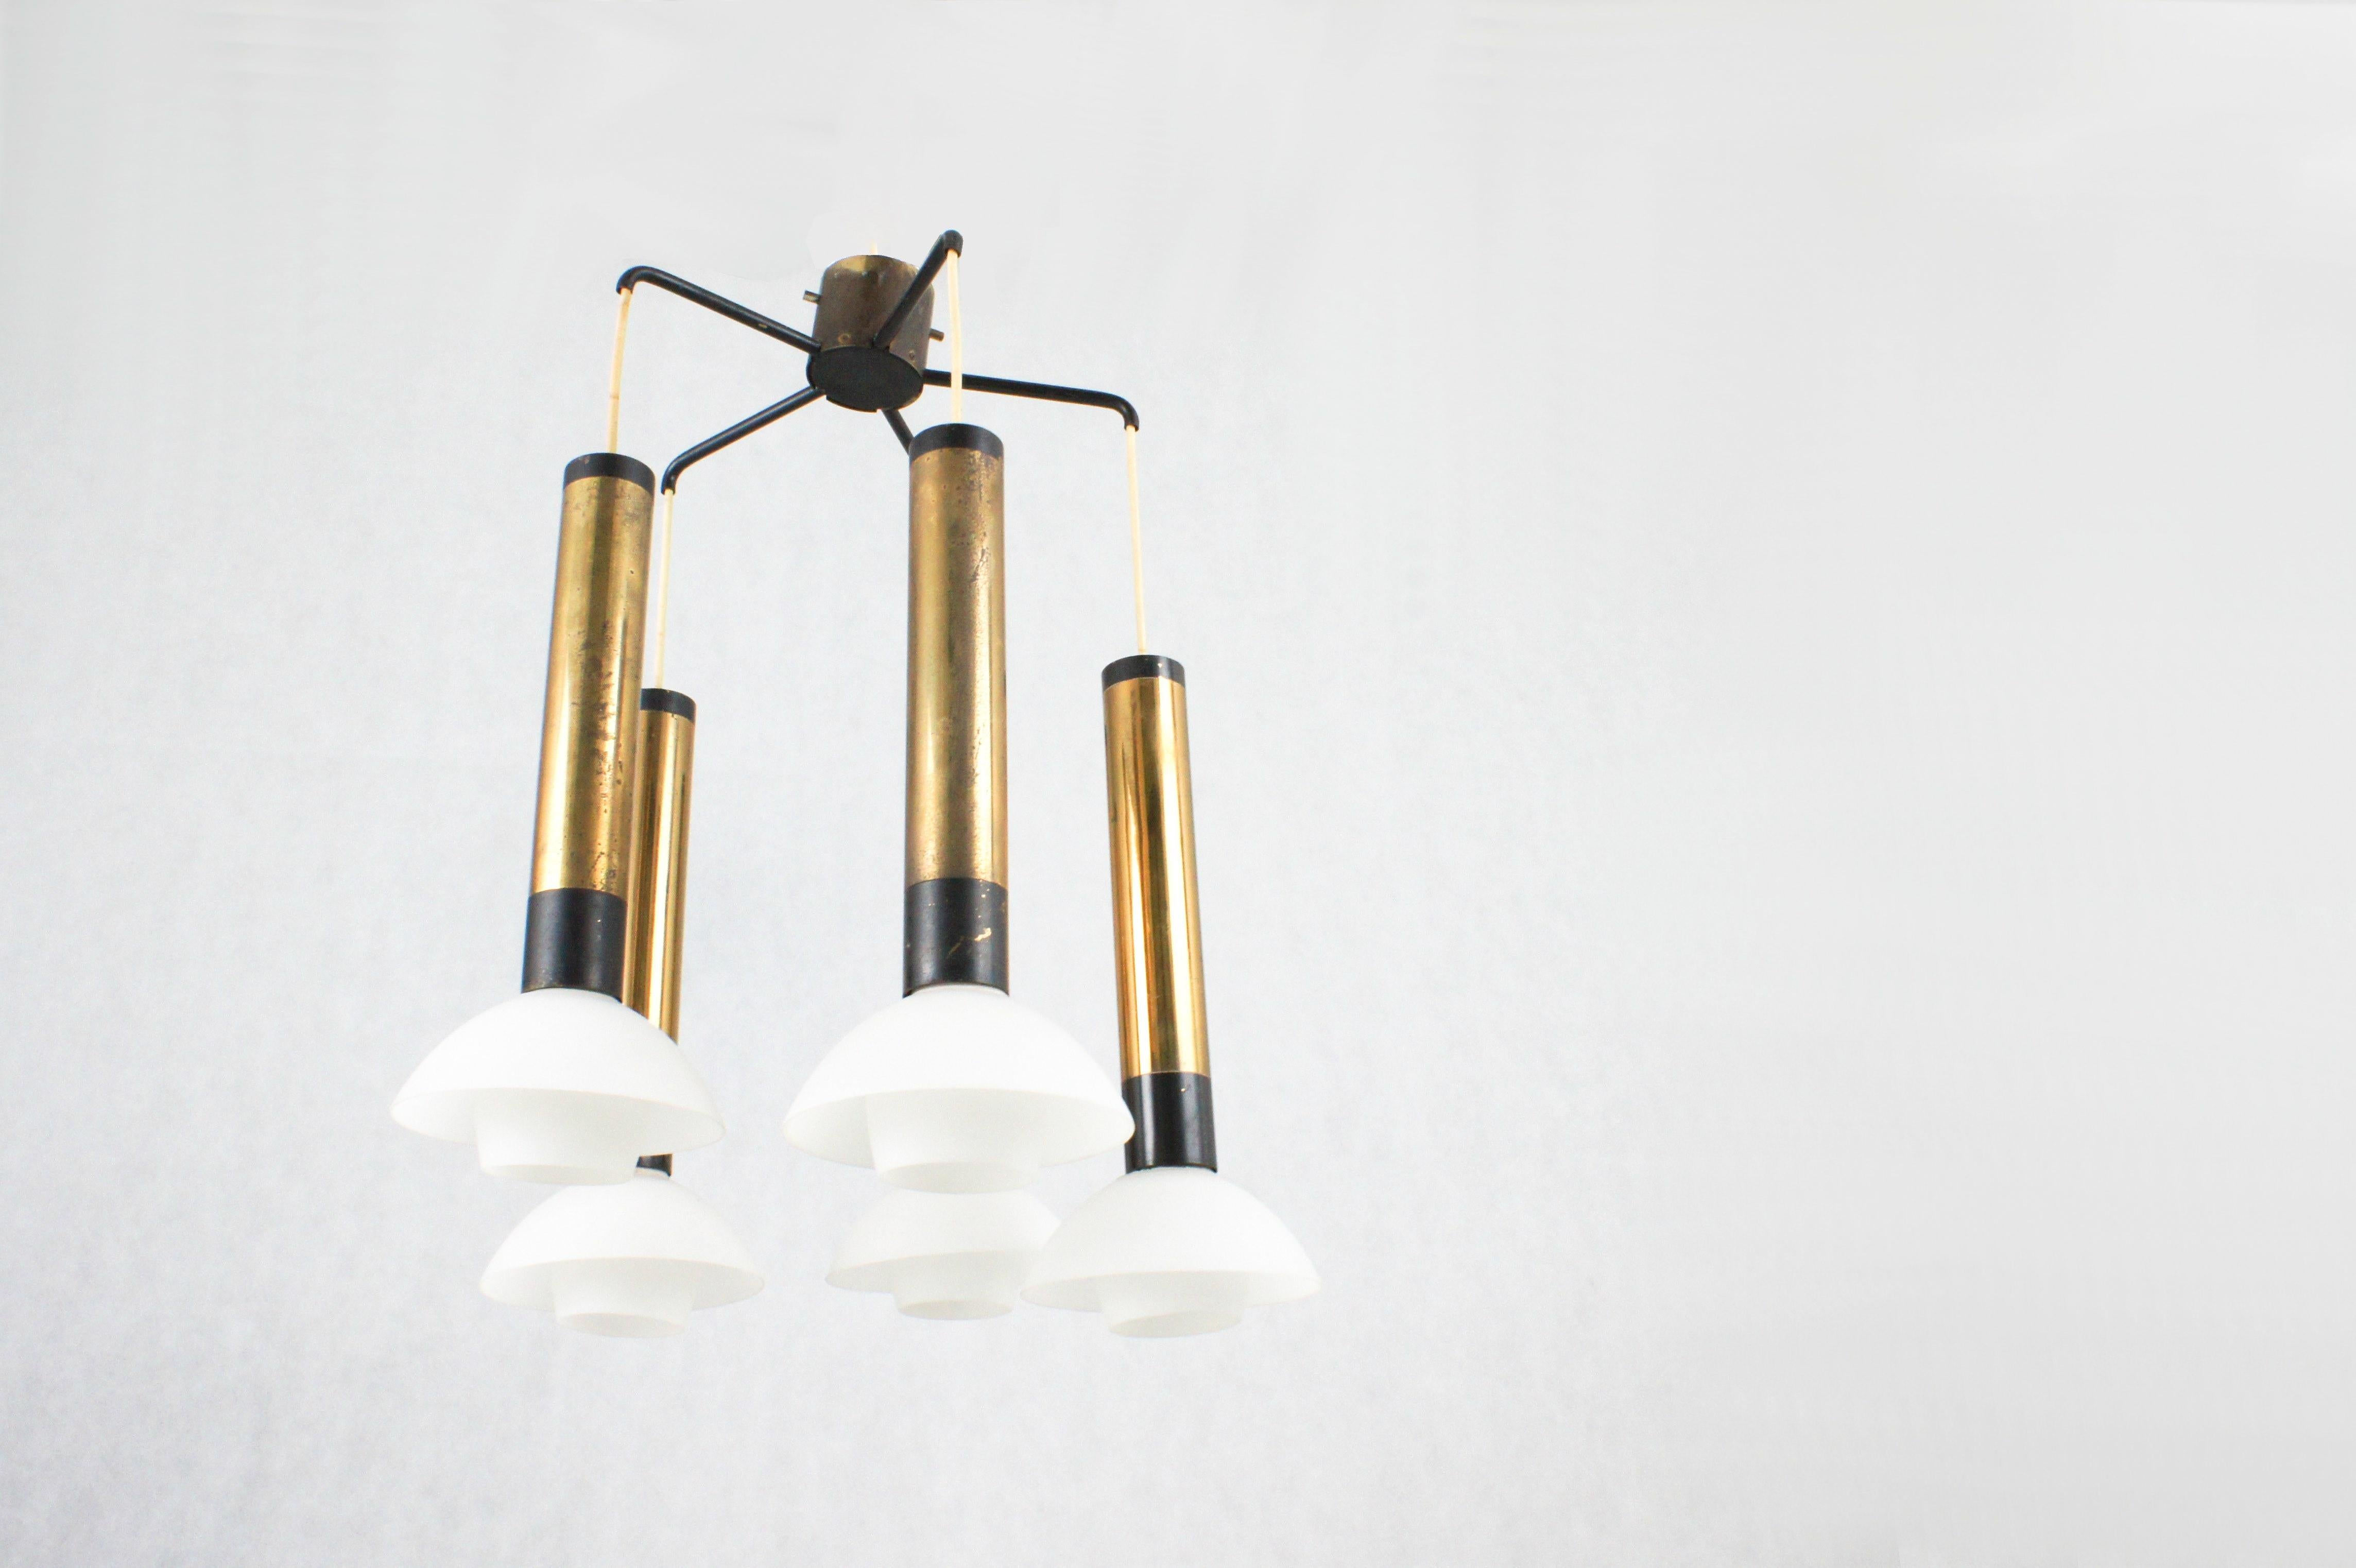 1960s stilnovo five-light pendant, metal frame and brass opal glass diffusers. 
Completely original condition, working.
